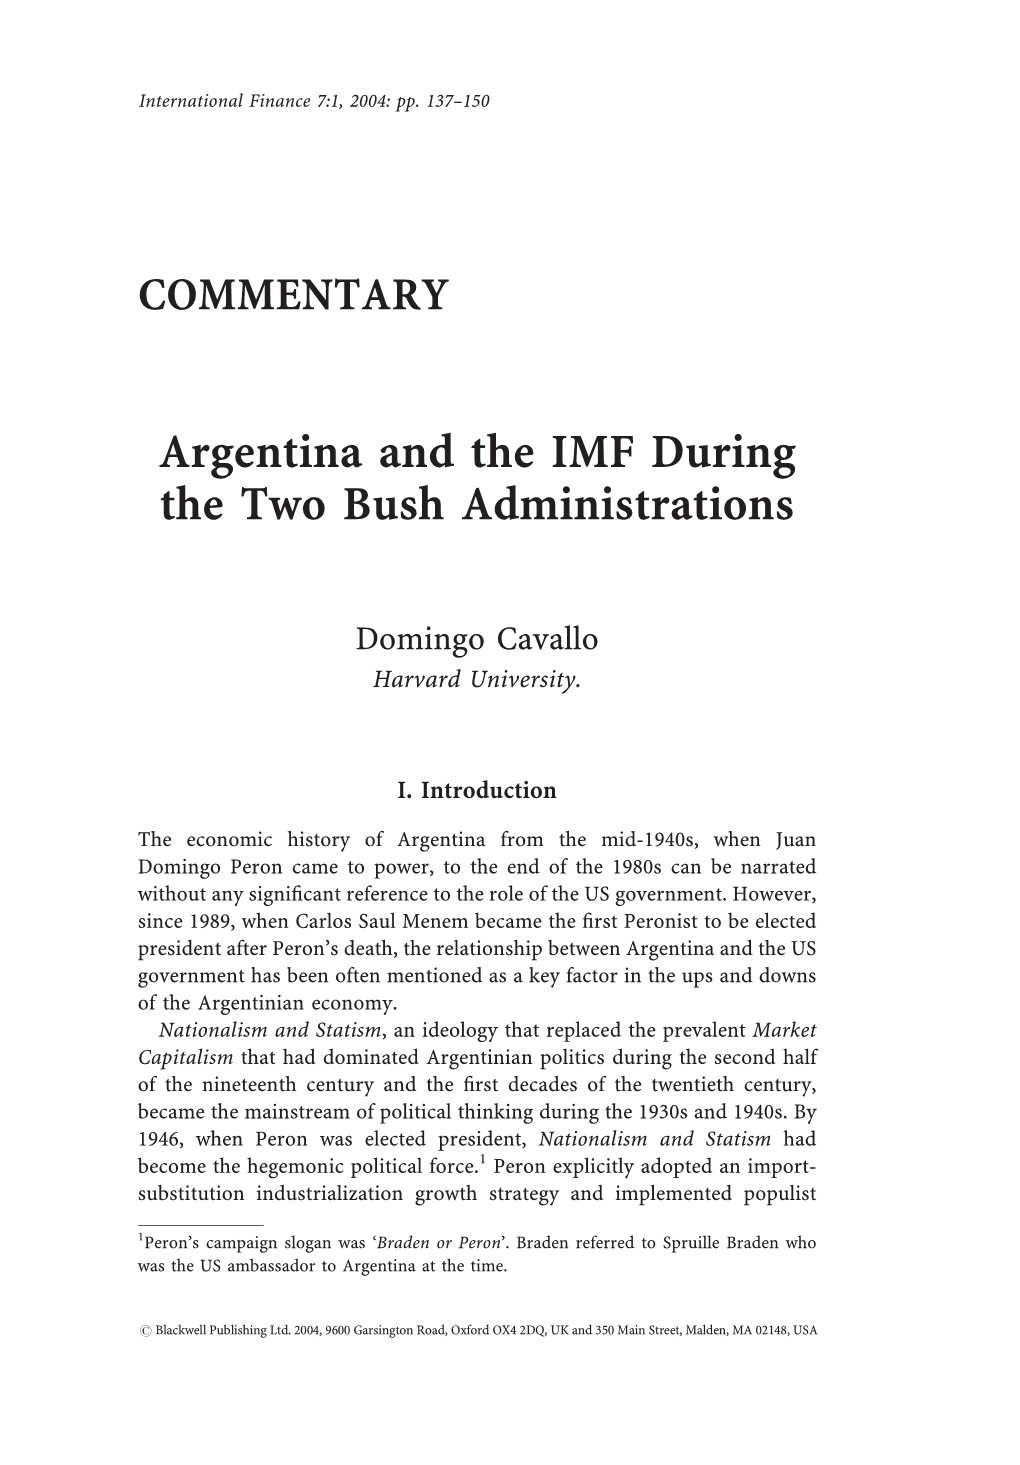 Argentina and the IMF During the Two Bush Administrations